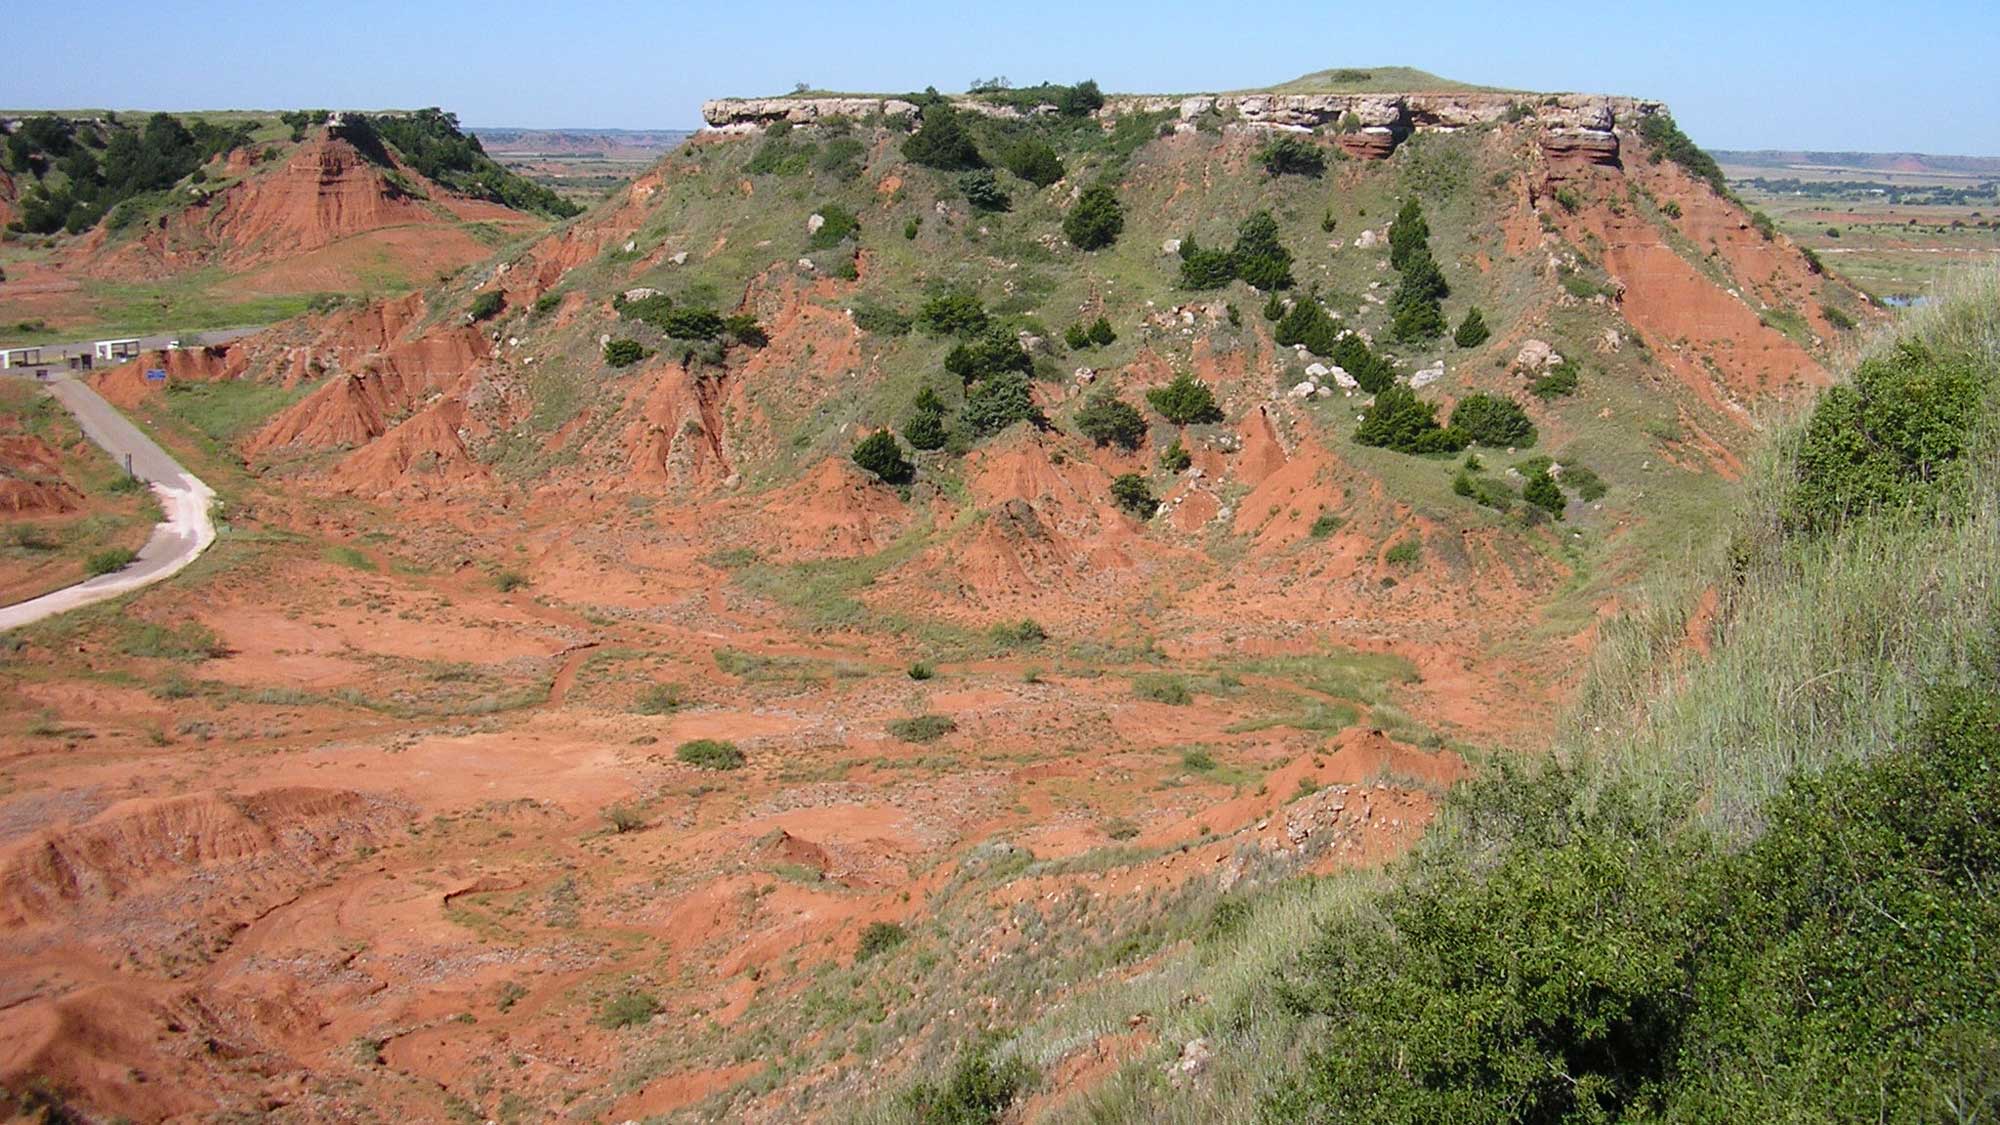 Photograph of exposures of Permian redbeds at the Gloss Mountains in Major County, Oklahoma.